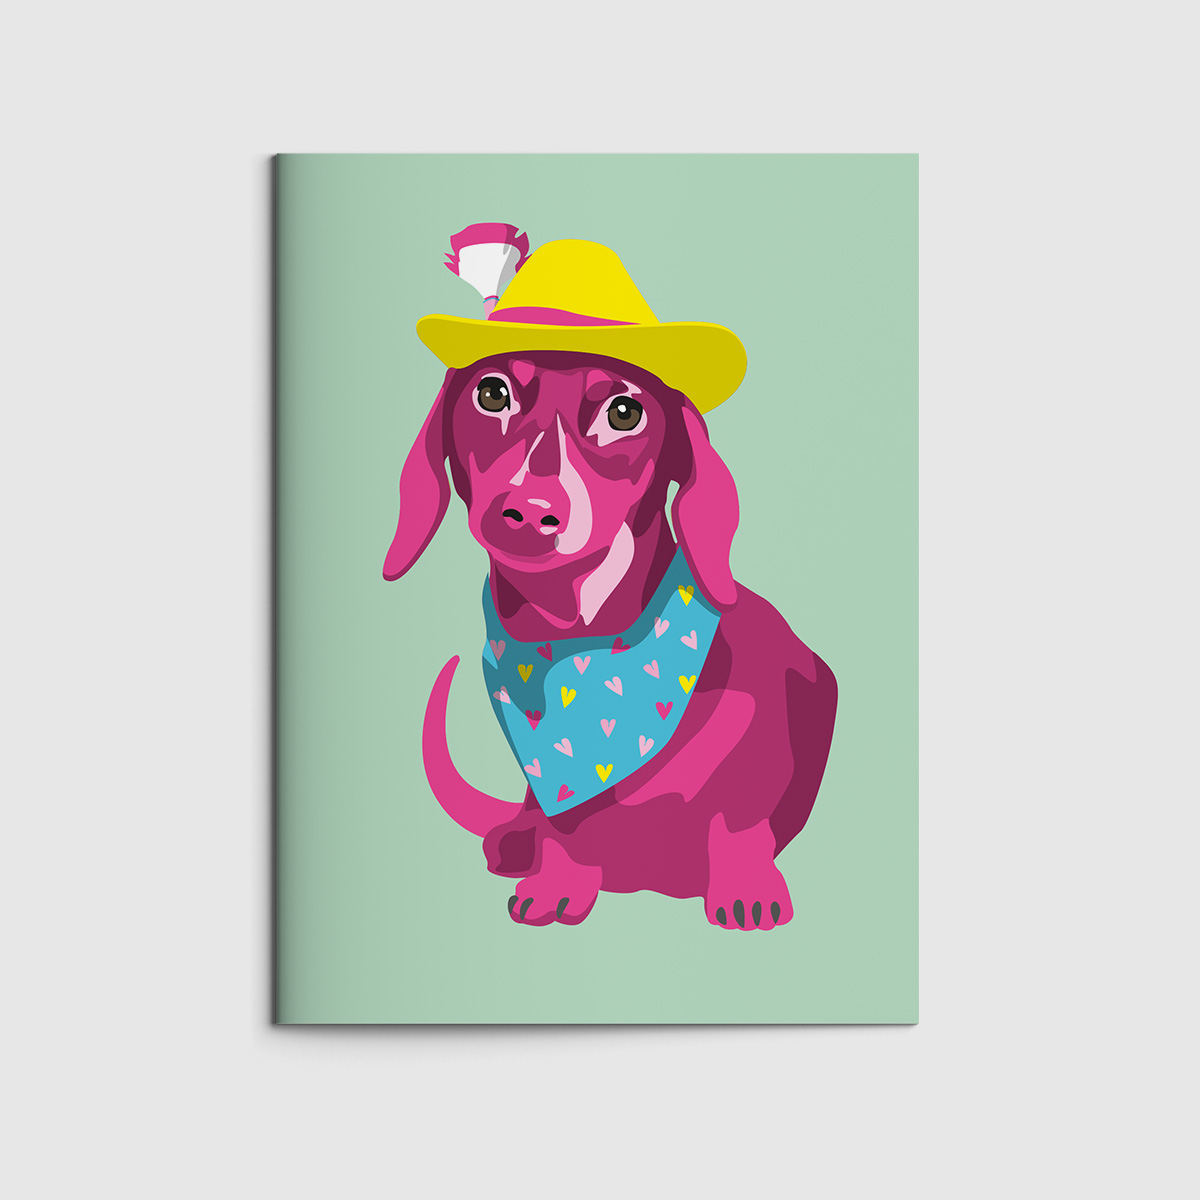 Booklet A5 - neonstyle - Dachshund with hat